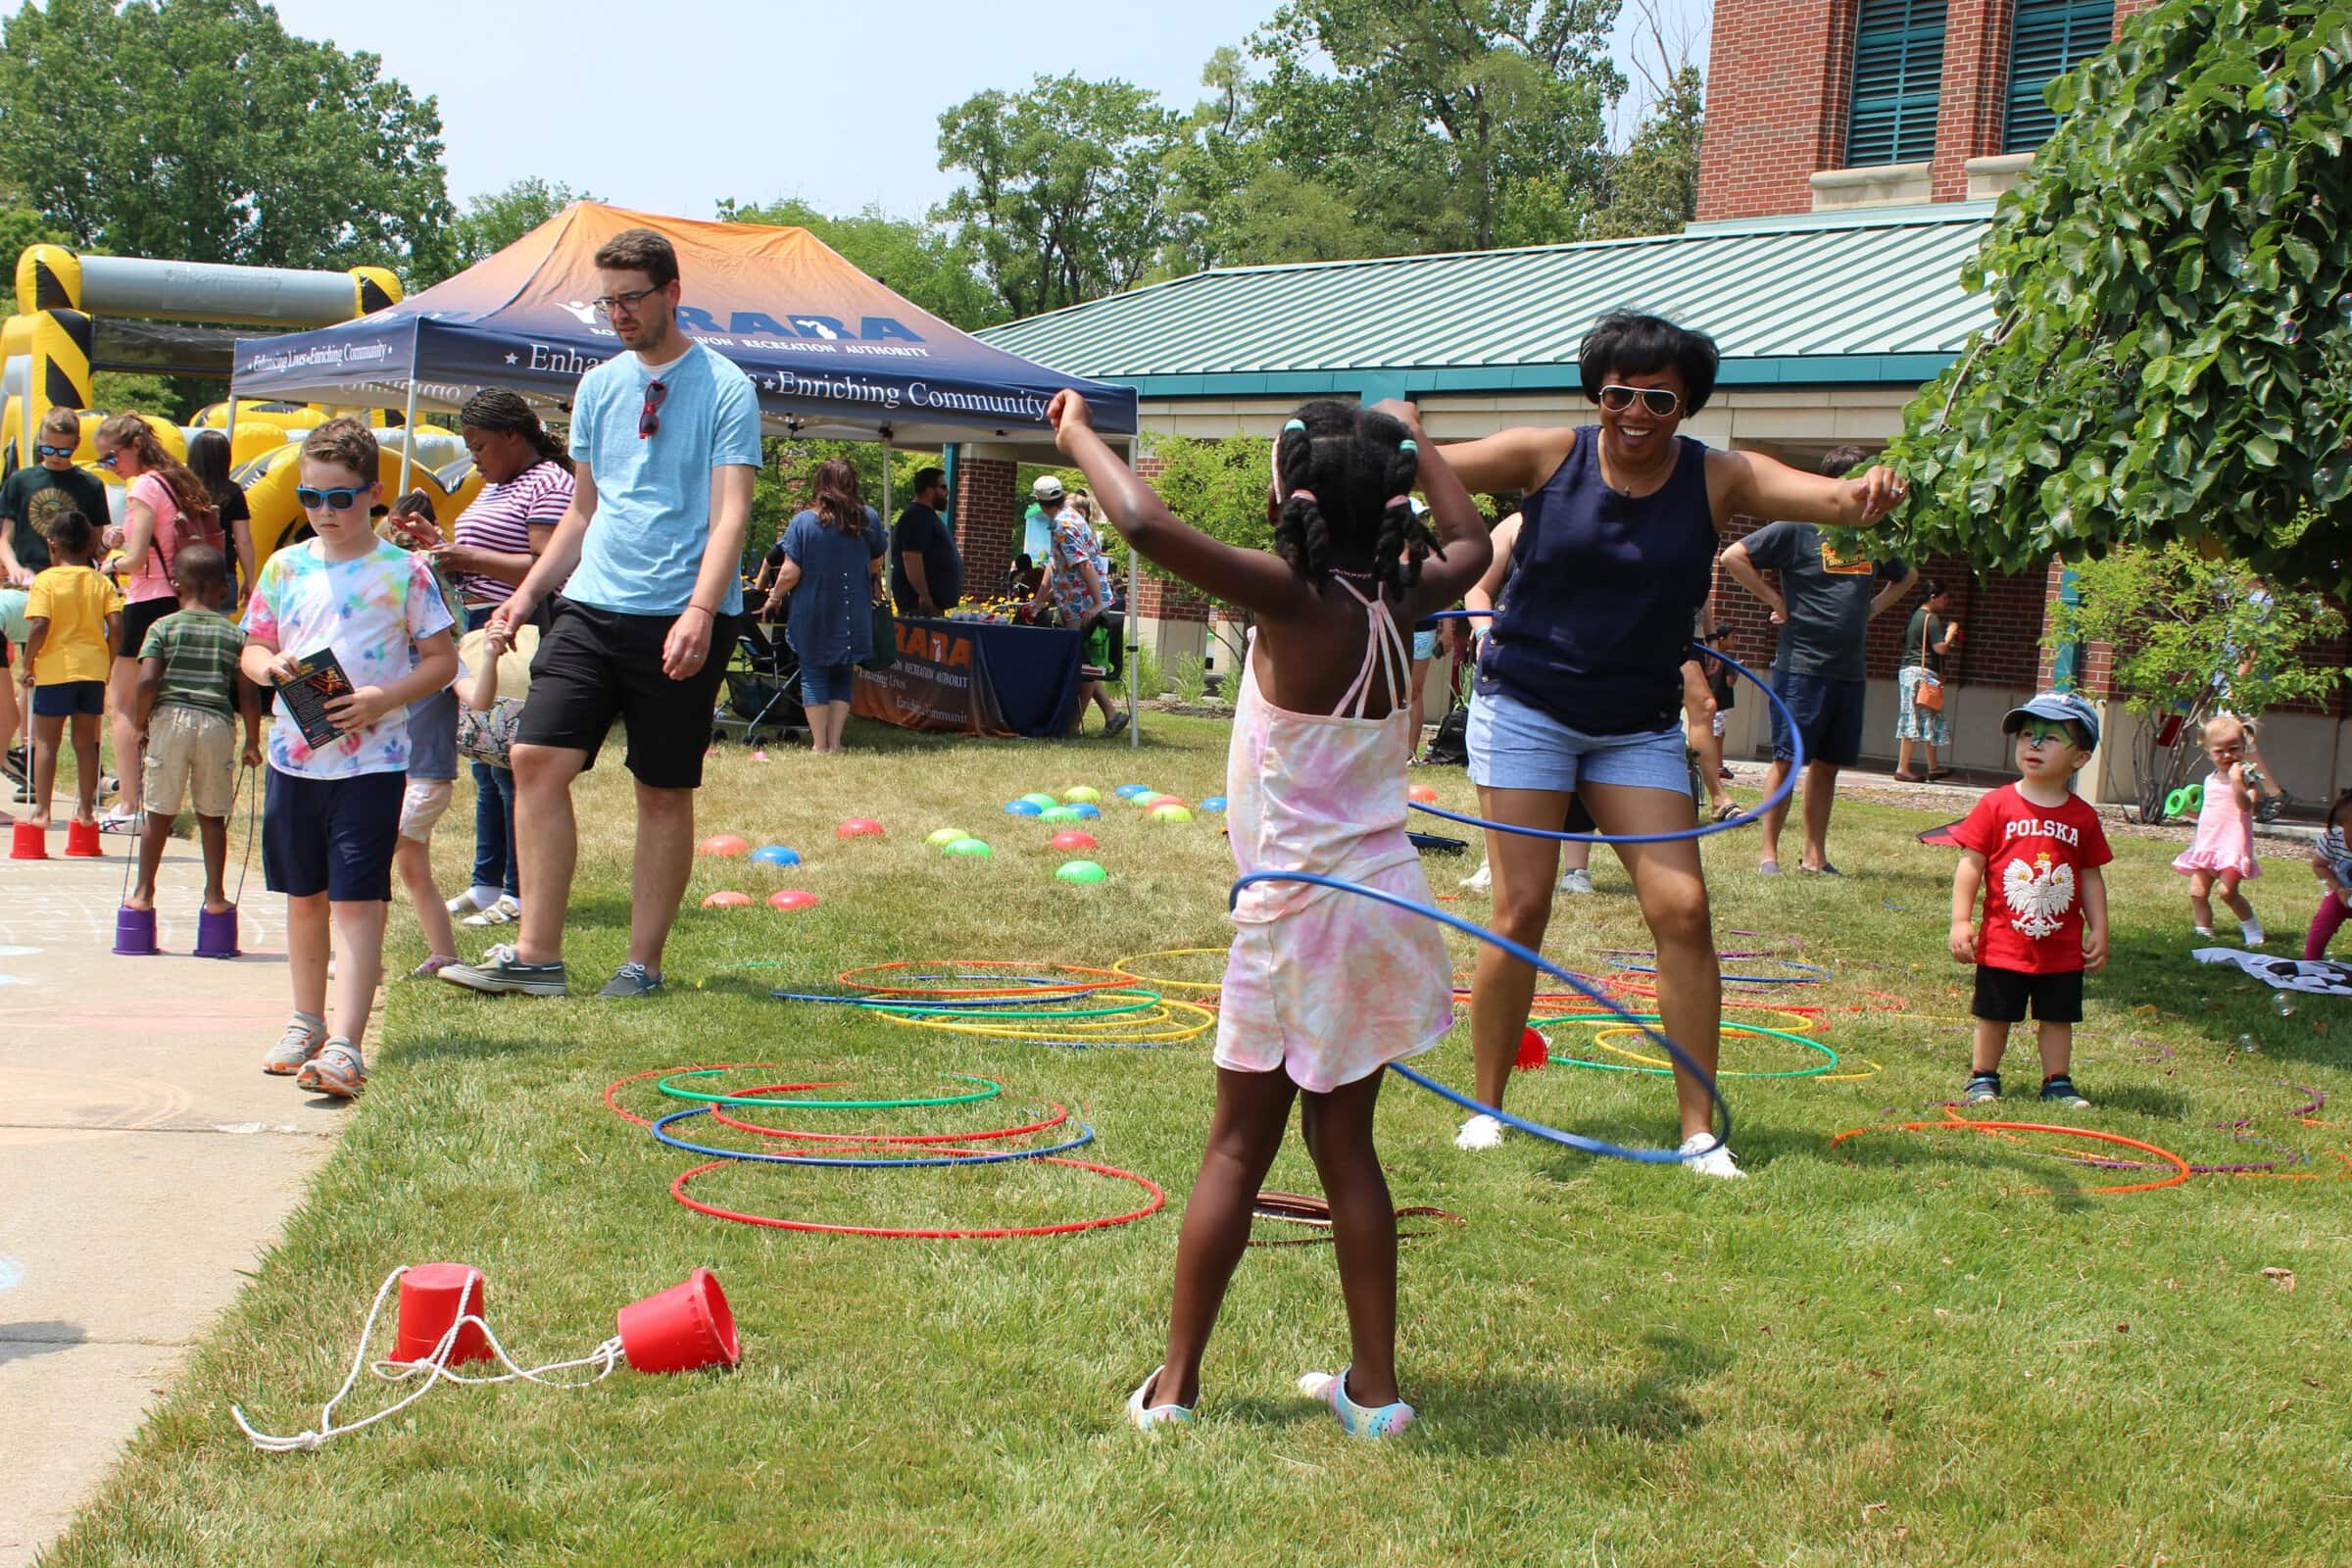 Patrons enjoying event with hula-hoops and bounce house outside the library